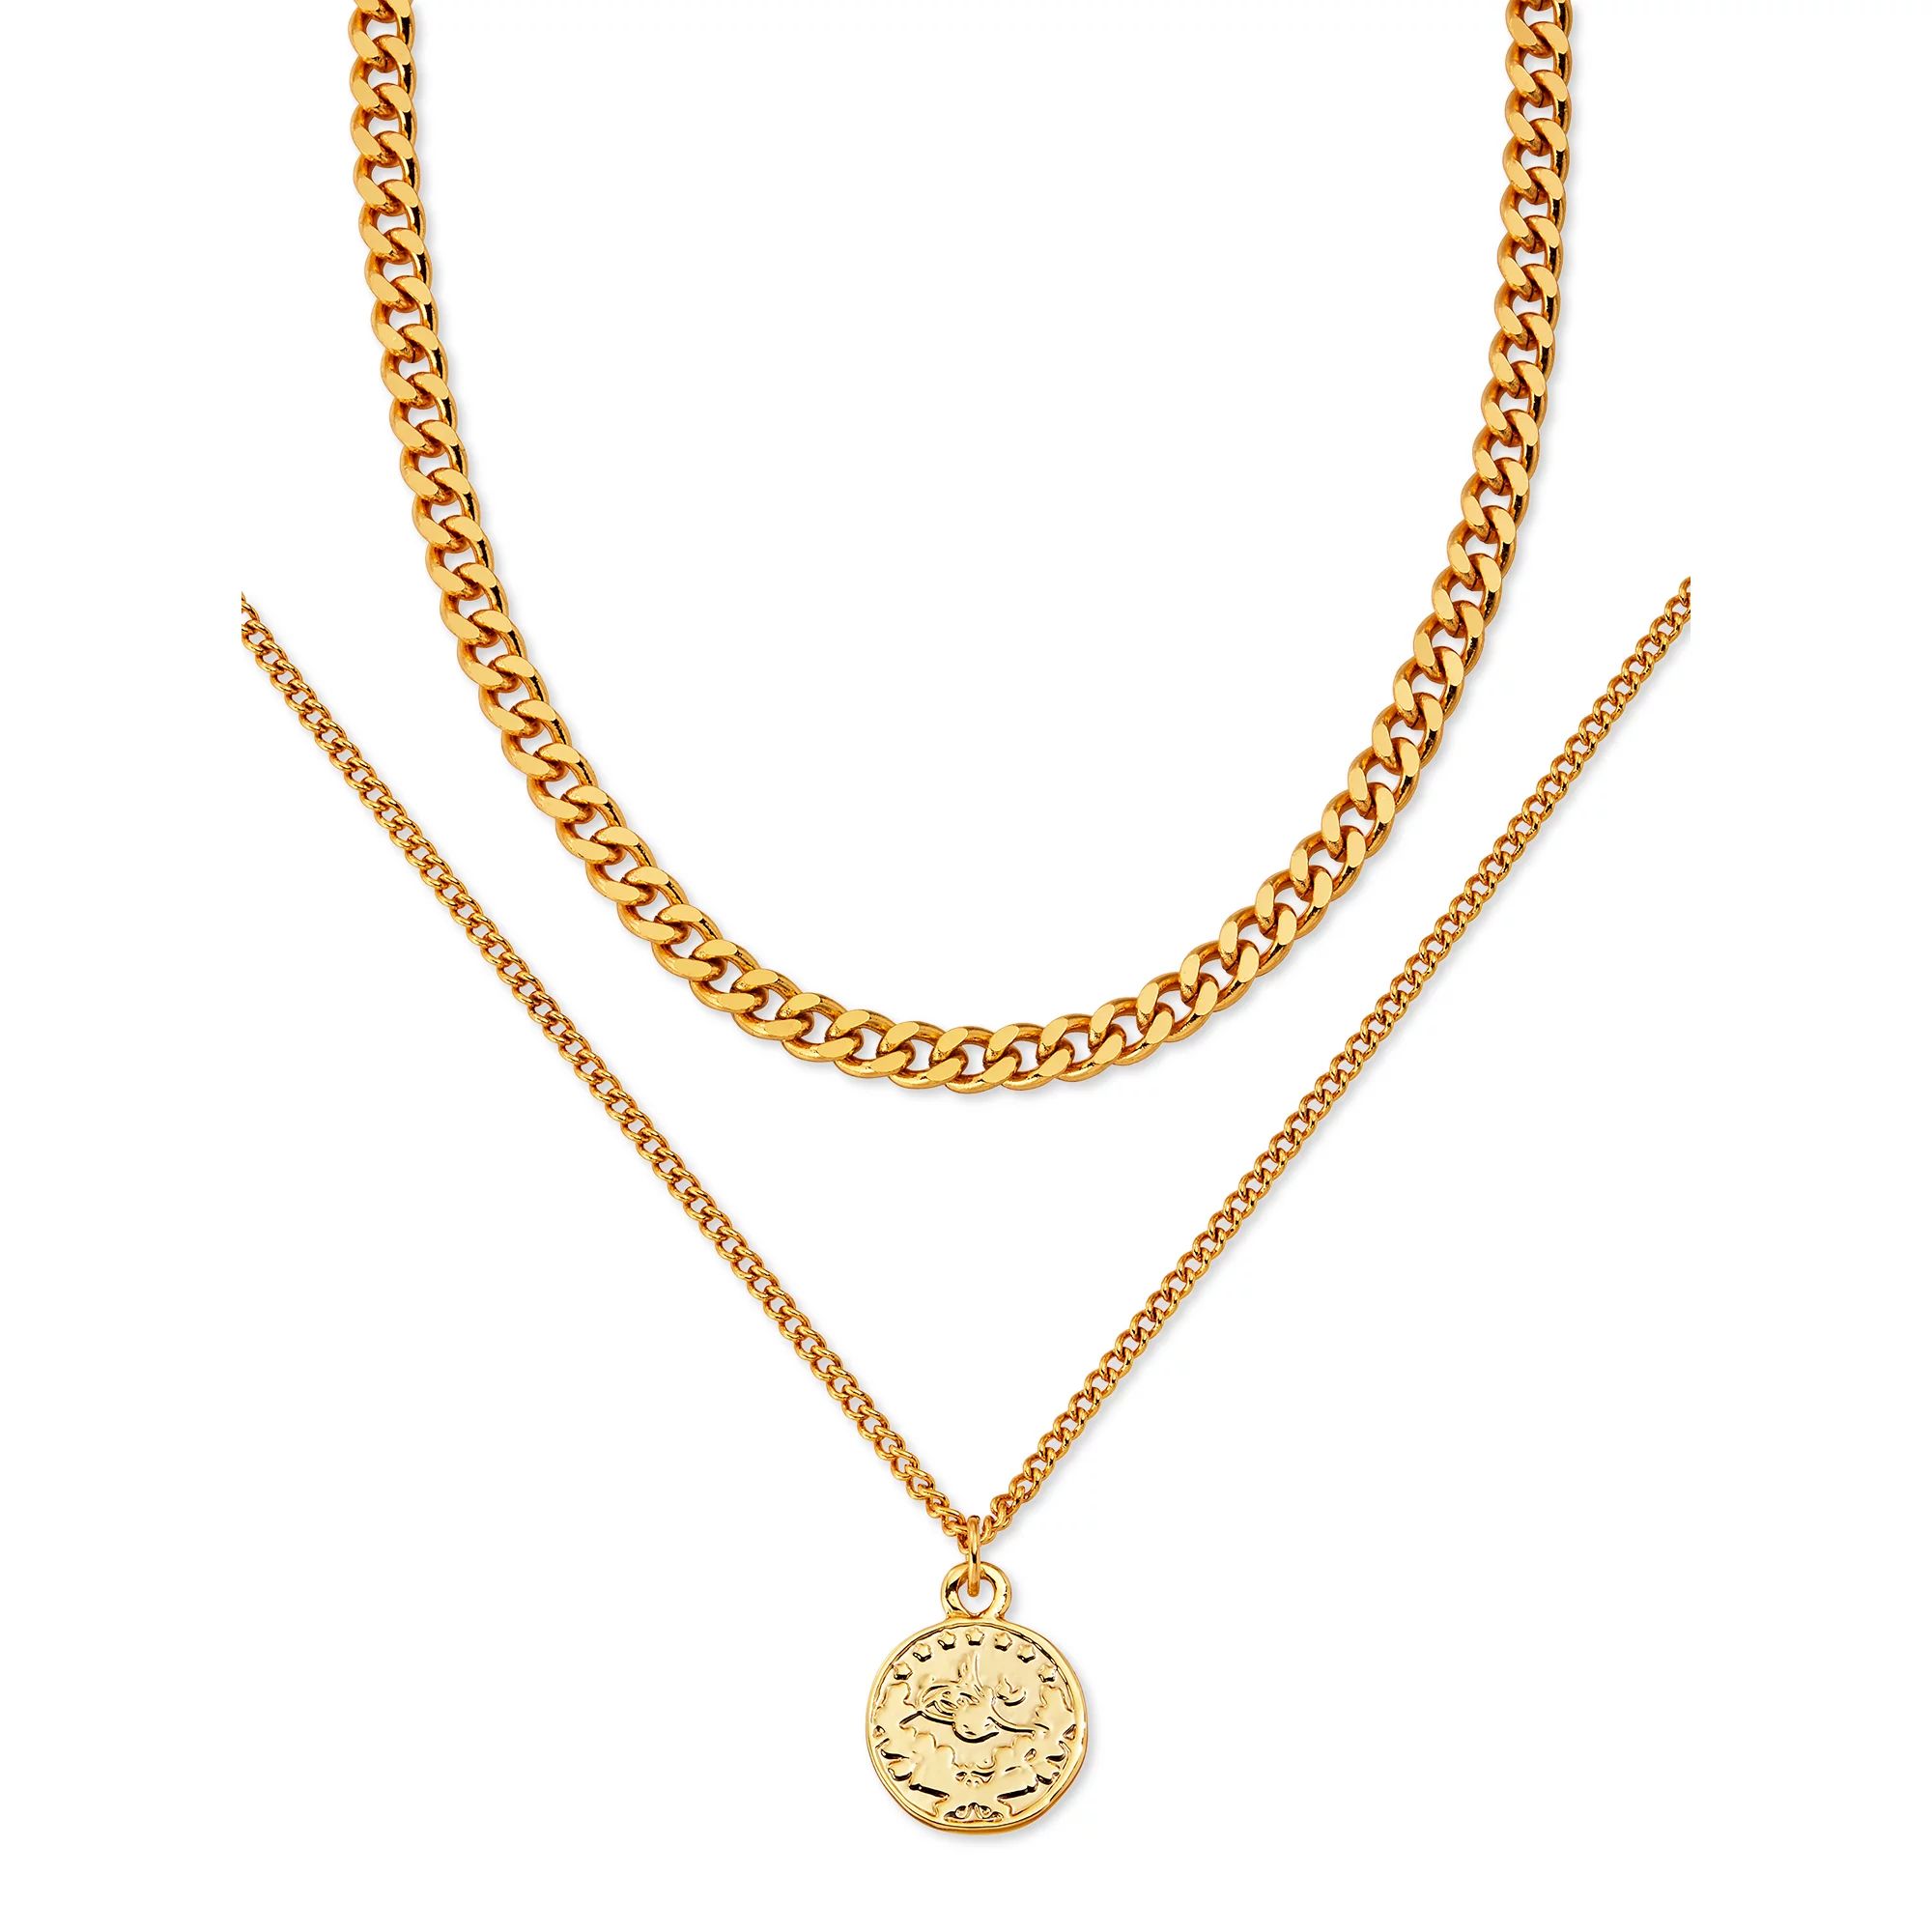 Scoop 14KT Gold Flash Plated Brass Layered Coin Necklace, 16.5" + 3" Extender | Walmart (US)